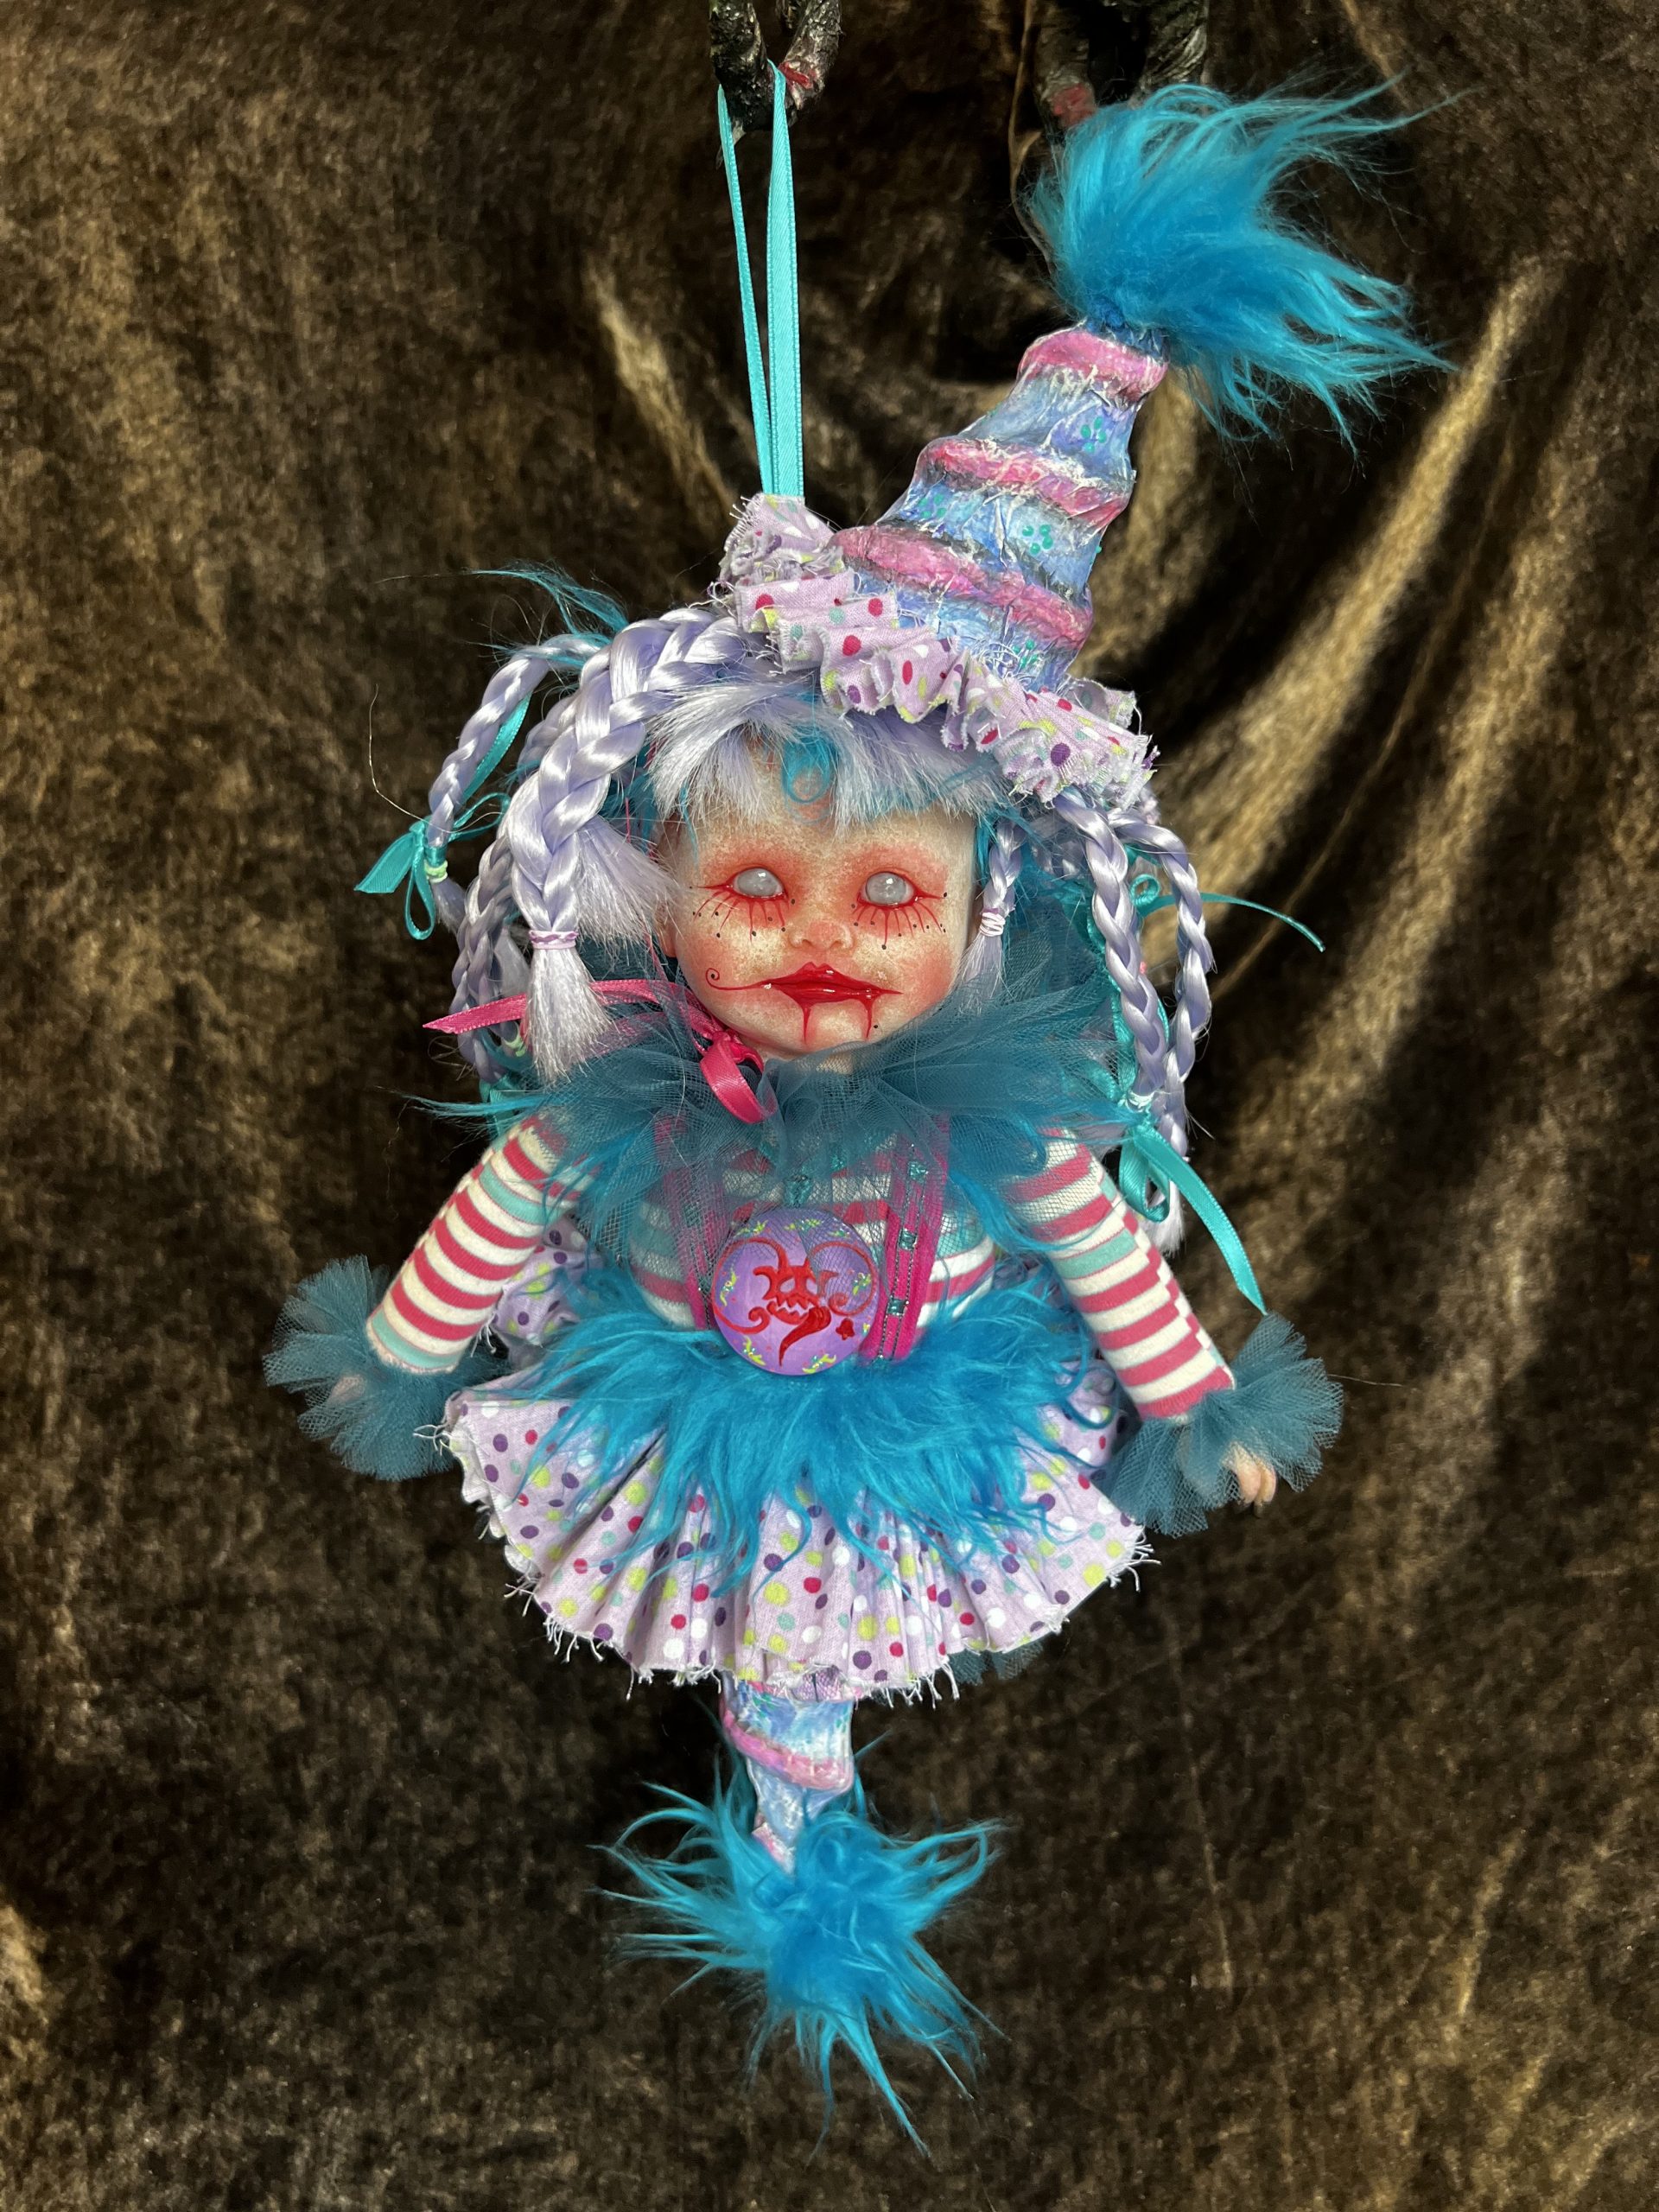 one of a kind purple and blue artdoll inspired by paintings of Michael Hussar gothic creepy clown ornament